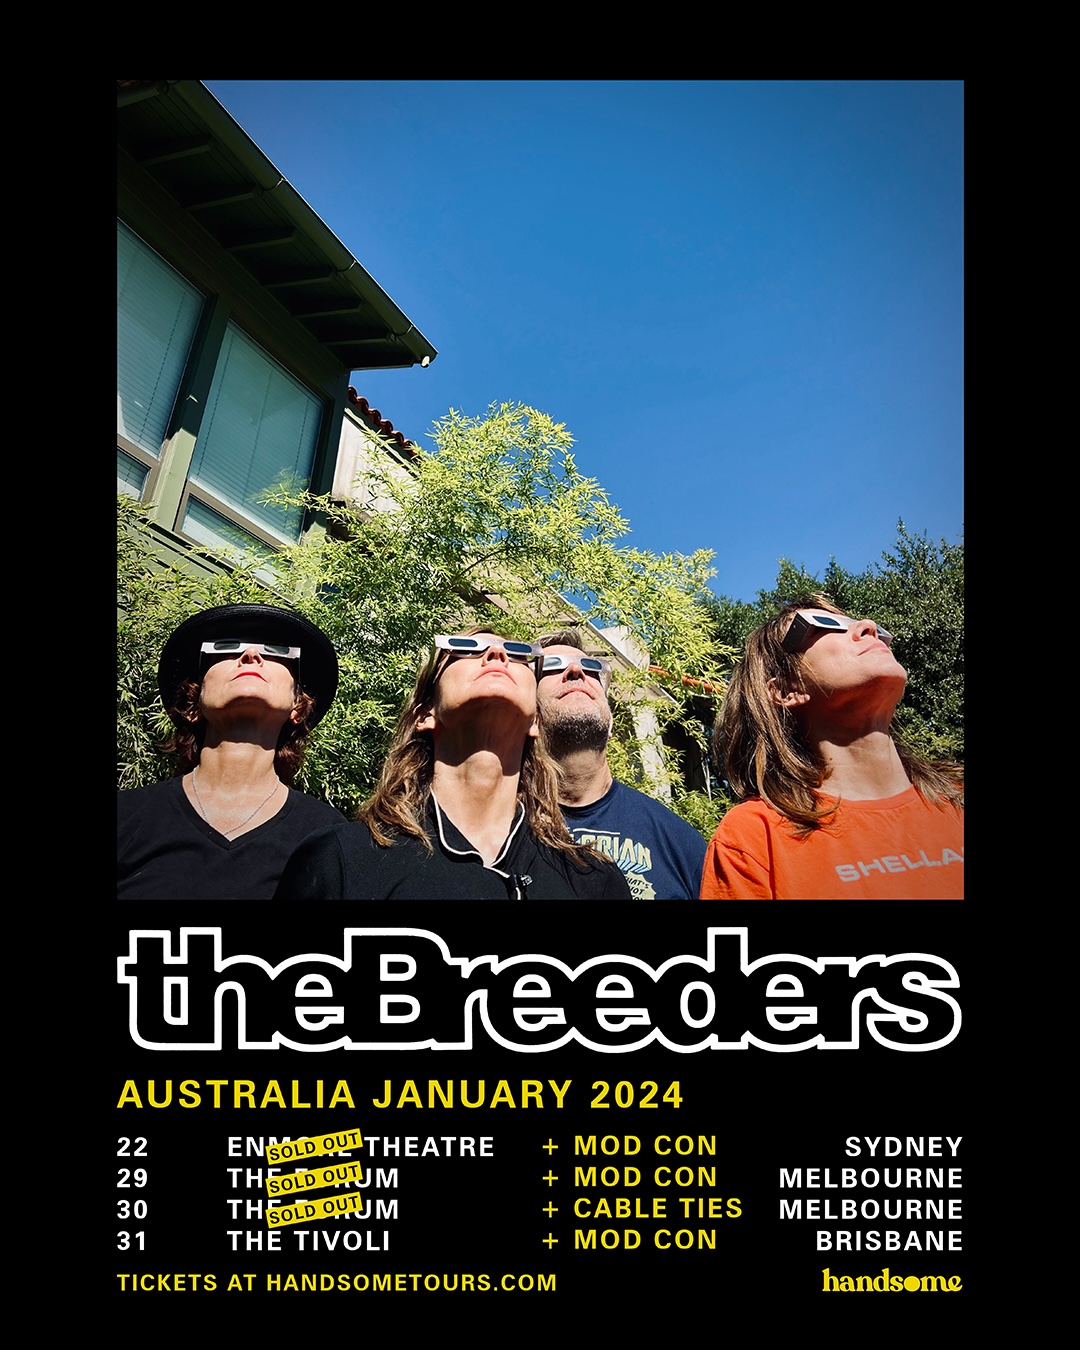 https://www.handsometours.com/wp-content/uploads/2023/10/Breeders-AU24-4X5-MEL-SOLD-OUT-SUPPORTS.jpg